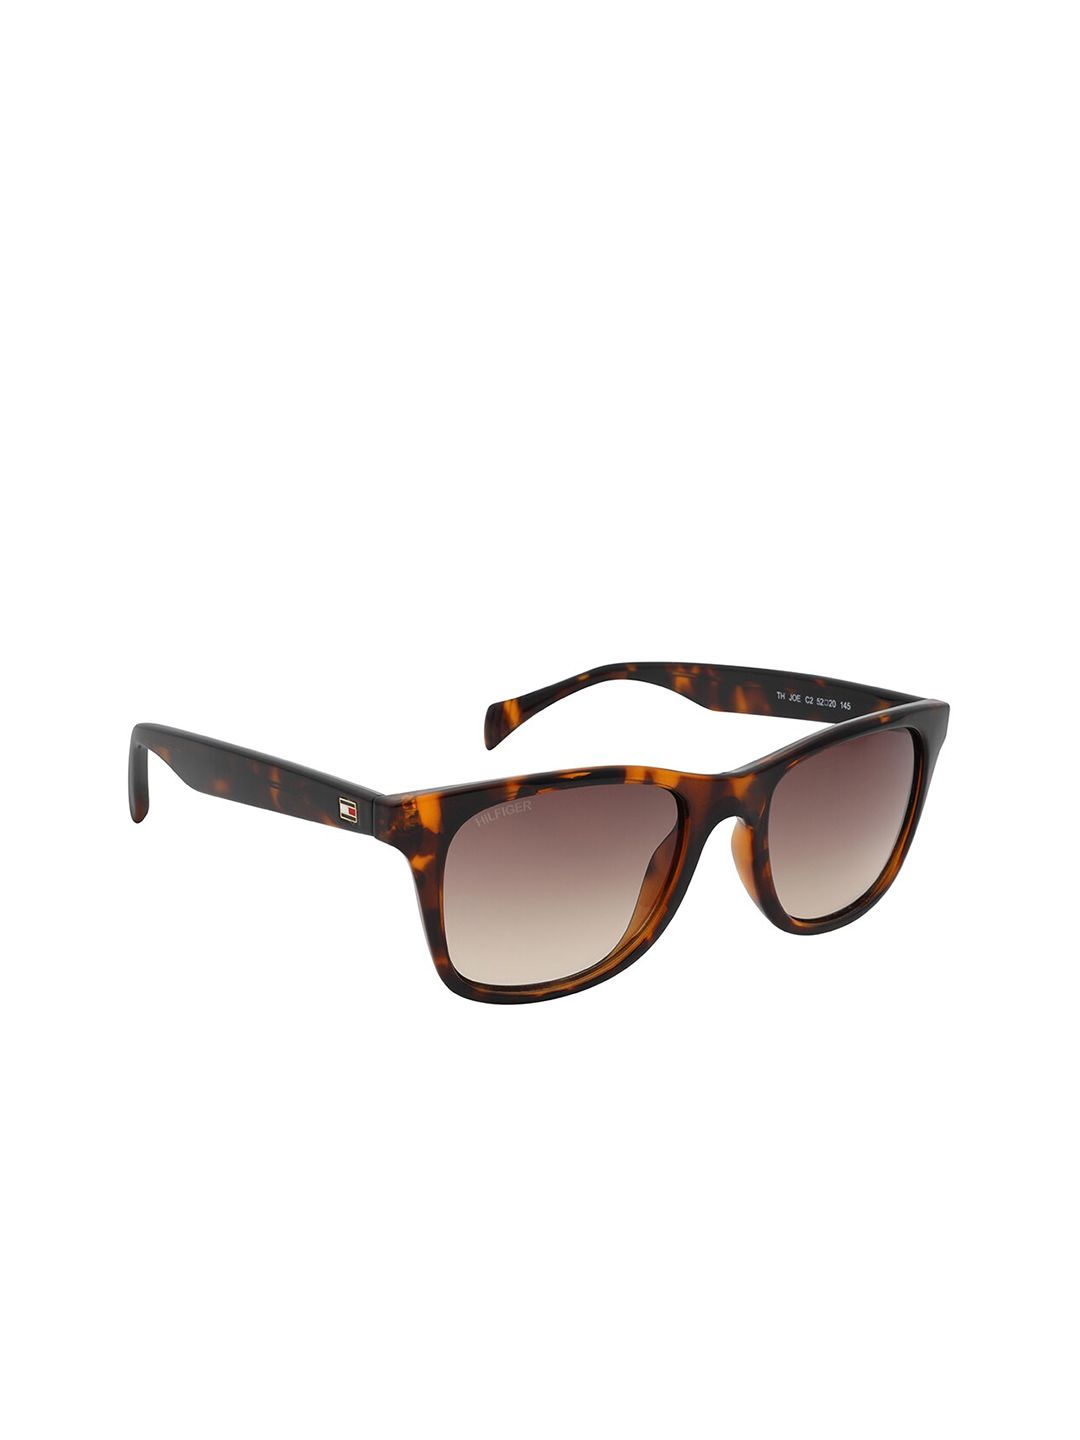 Tommy Hilfiger Unisex Brown Lens & Brown Wayfarer Sunglasses with UV Protected Lens Price in India